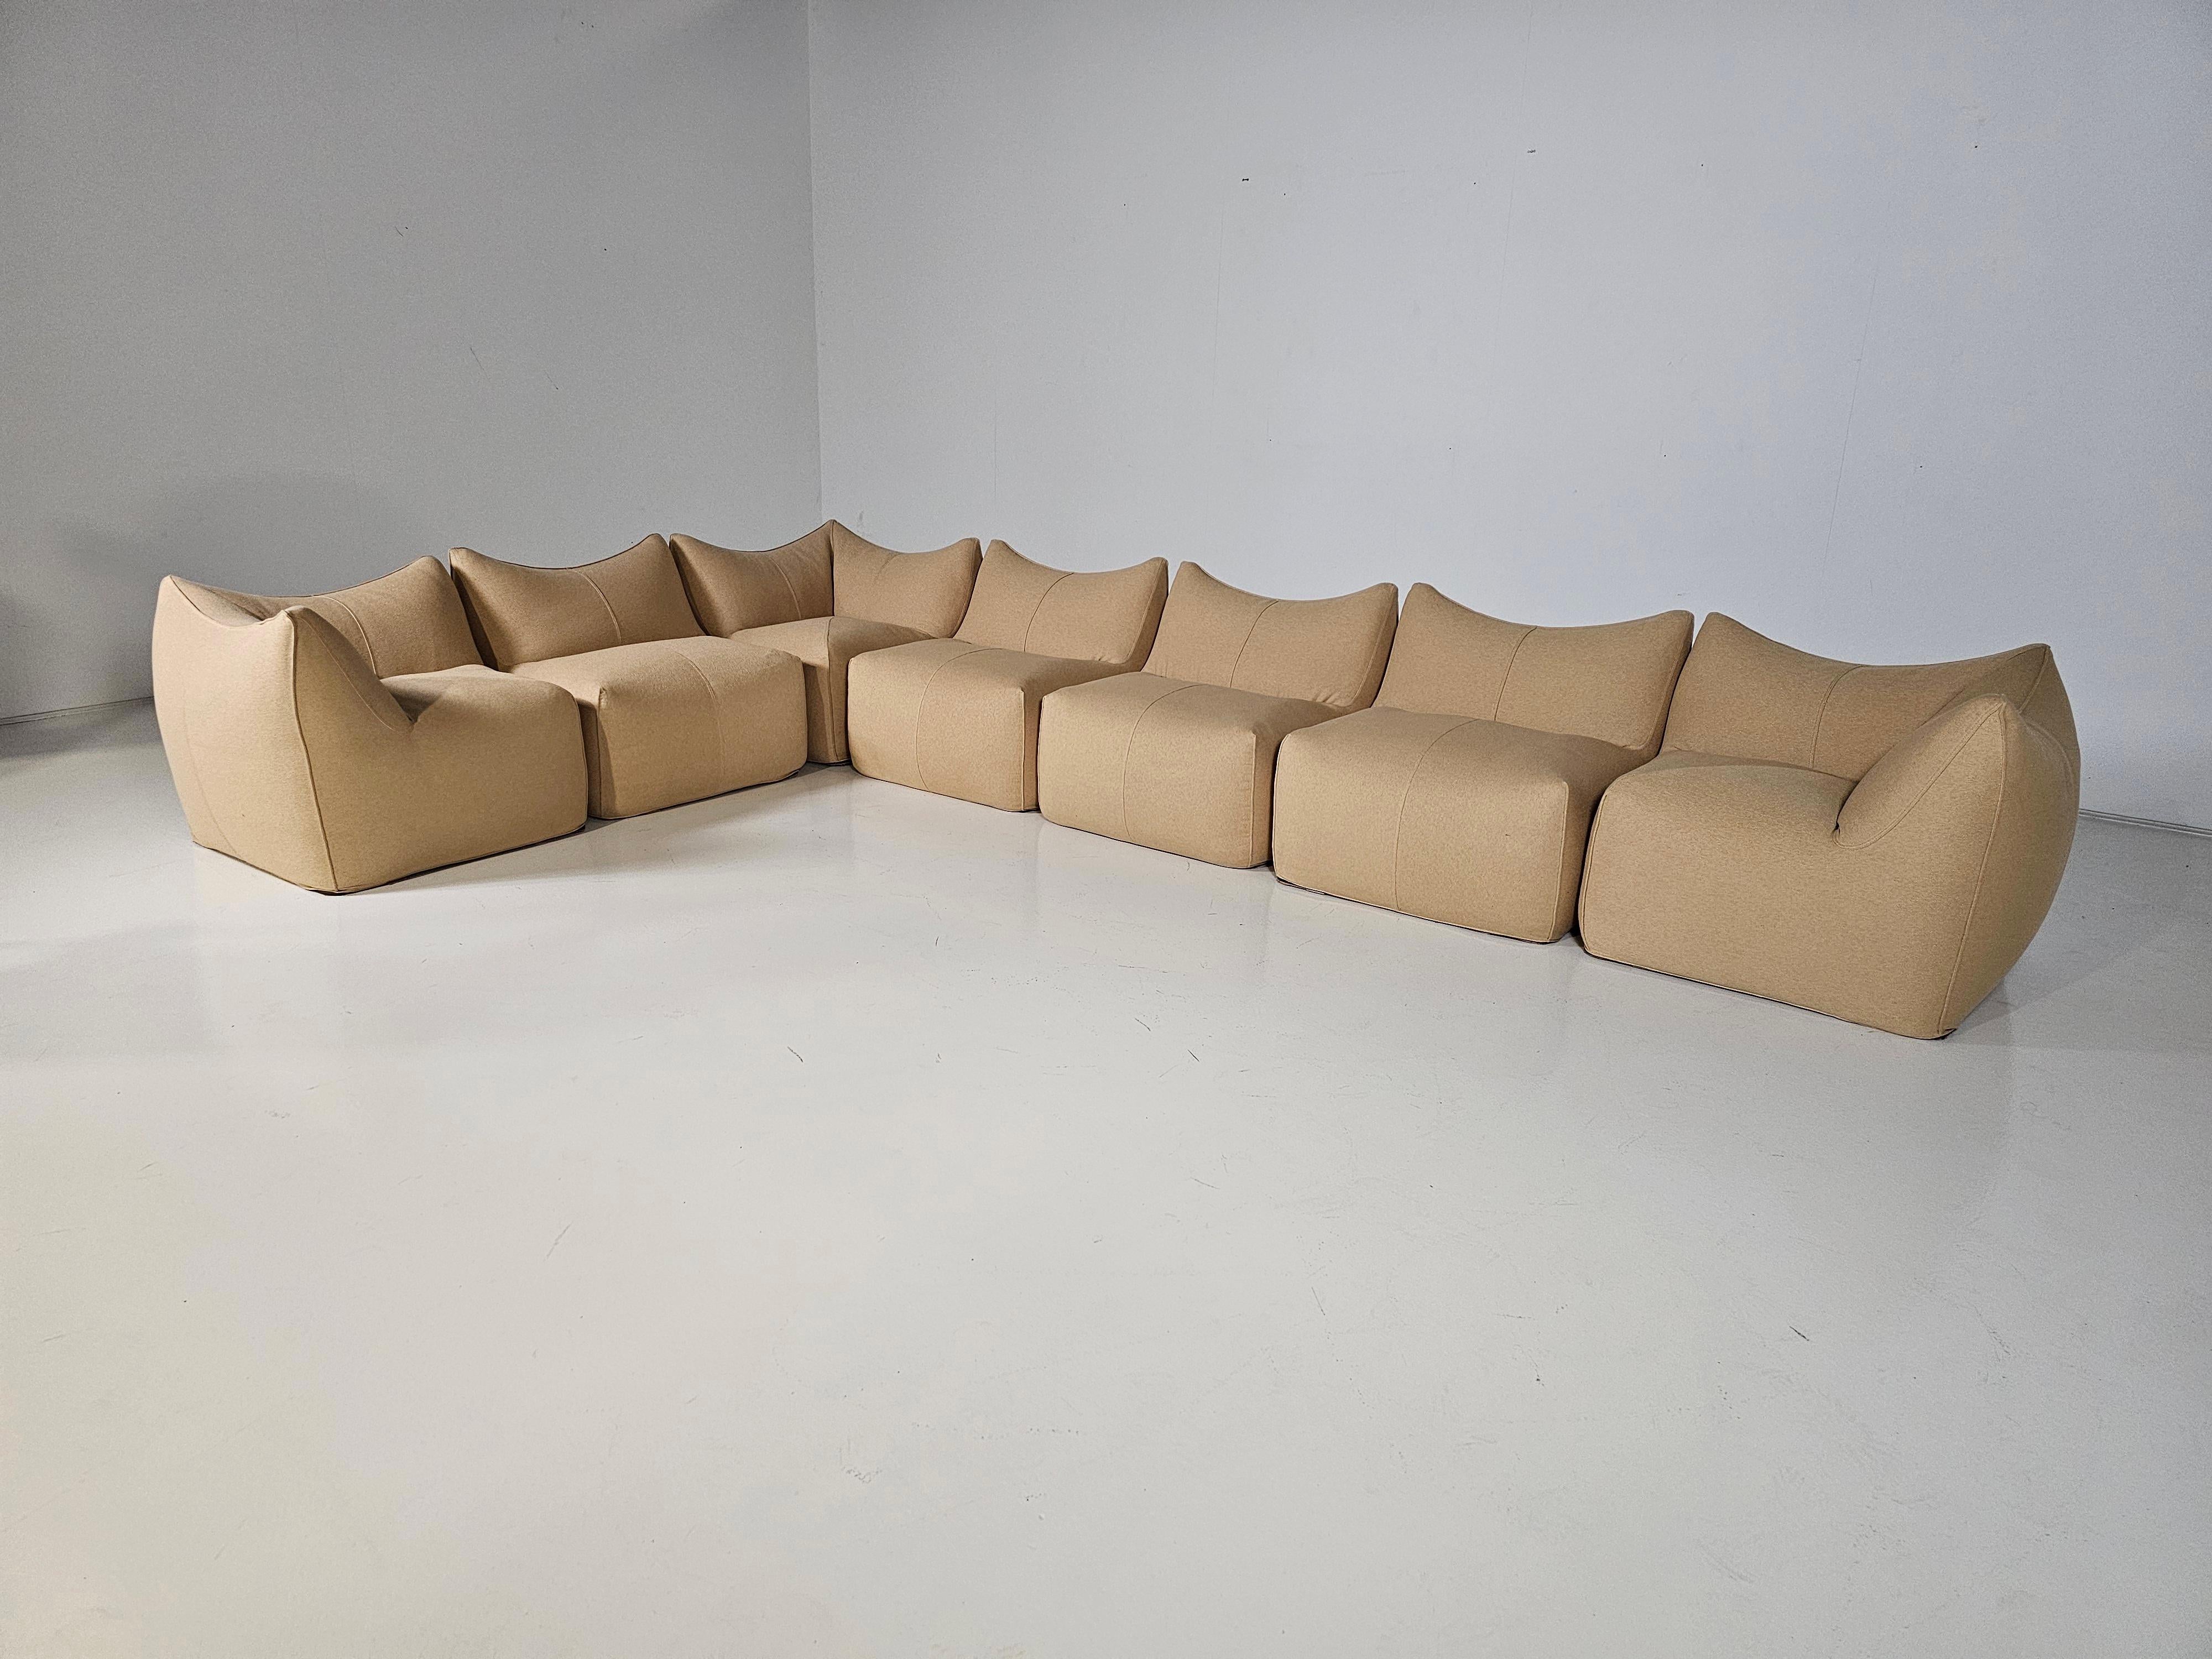 Le Bambole sectional 7-seater sofa by Mario Bellini for B&B Italia, 1970s. The Bambole is an iconic piece of Italian design. It was awarded the 1979 'Compasso d'Oro' award. An example of Le Bambole is included in MoMA's permanent collection. It's